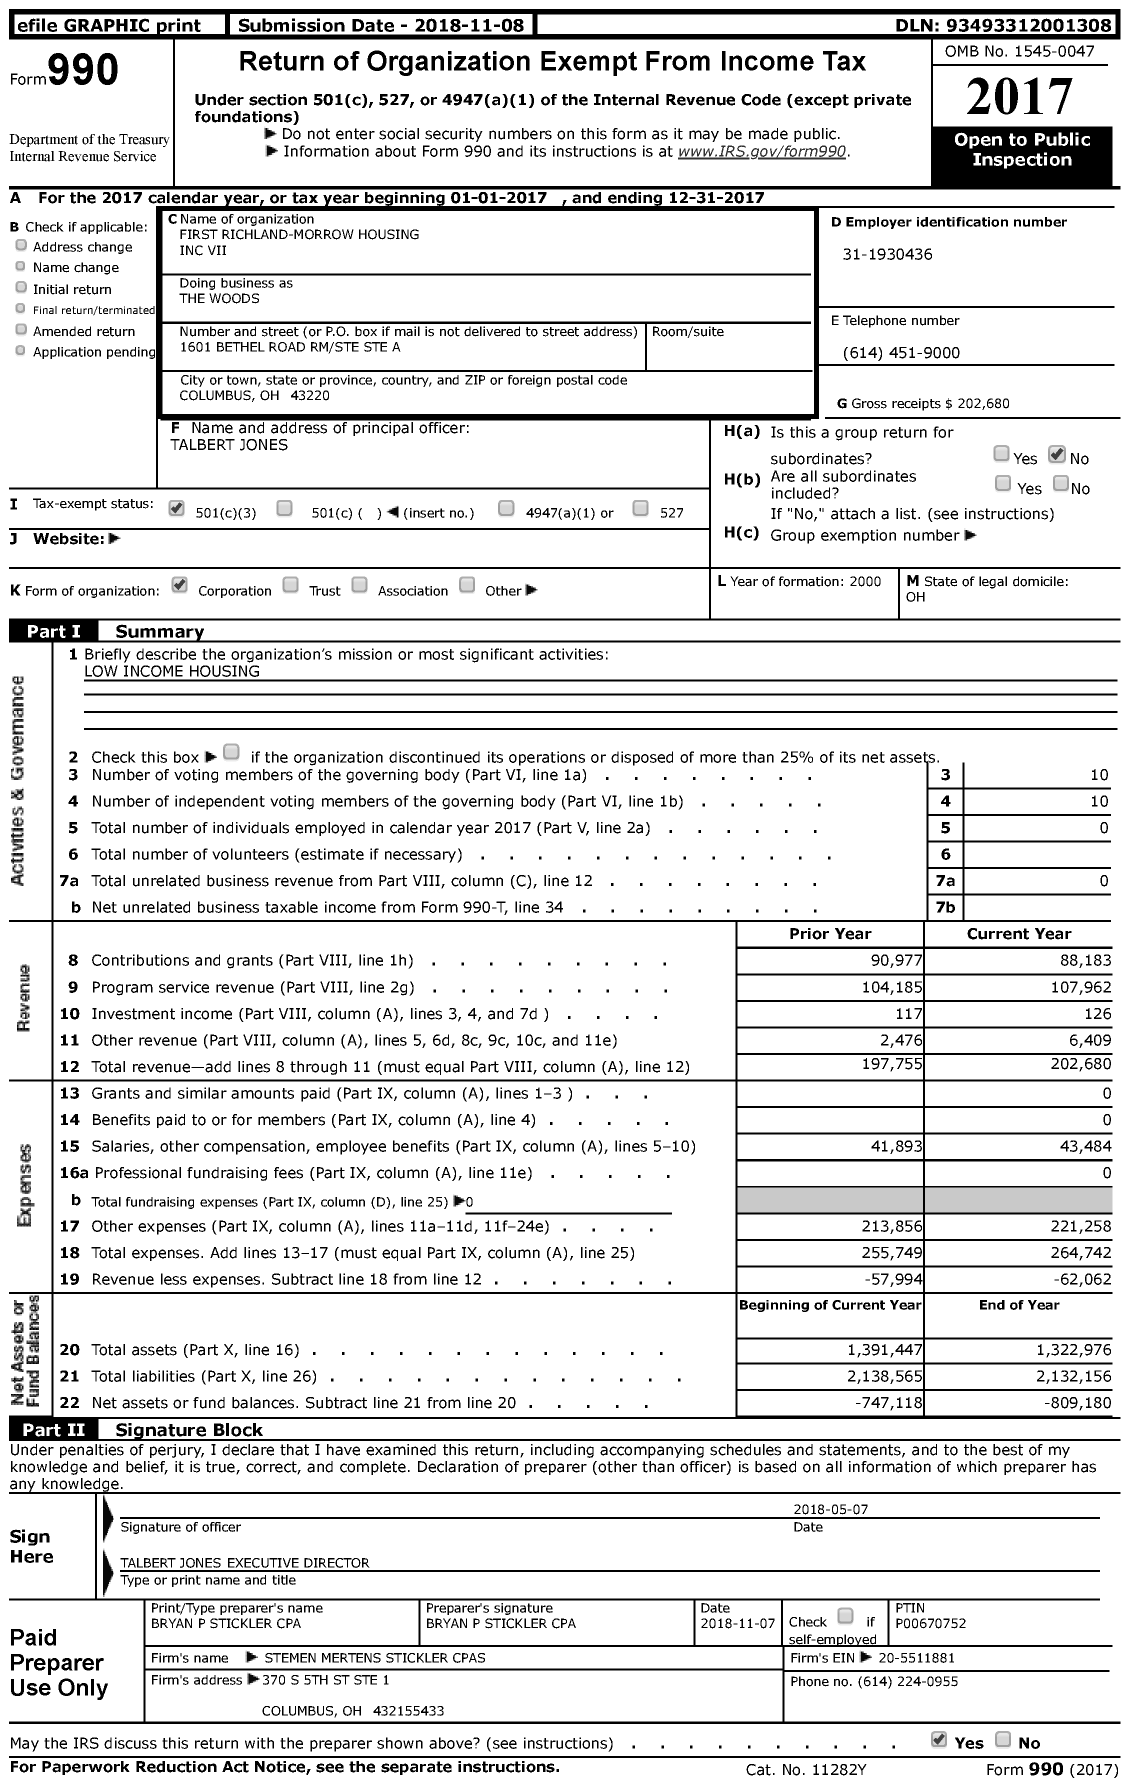 Image of first page of 2017 Form 990 for The Woods / First Richland-Morrow Housing Inc Vii